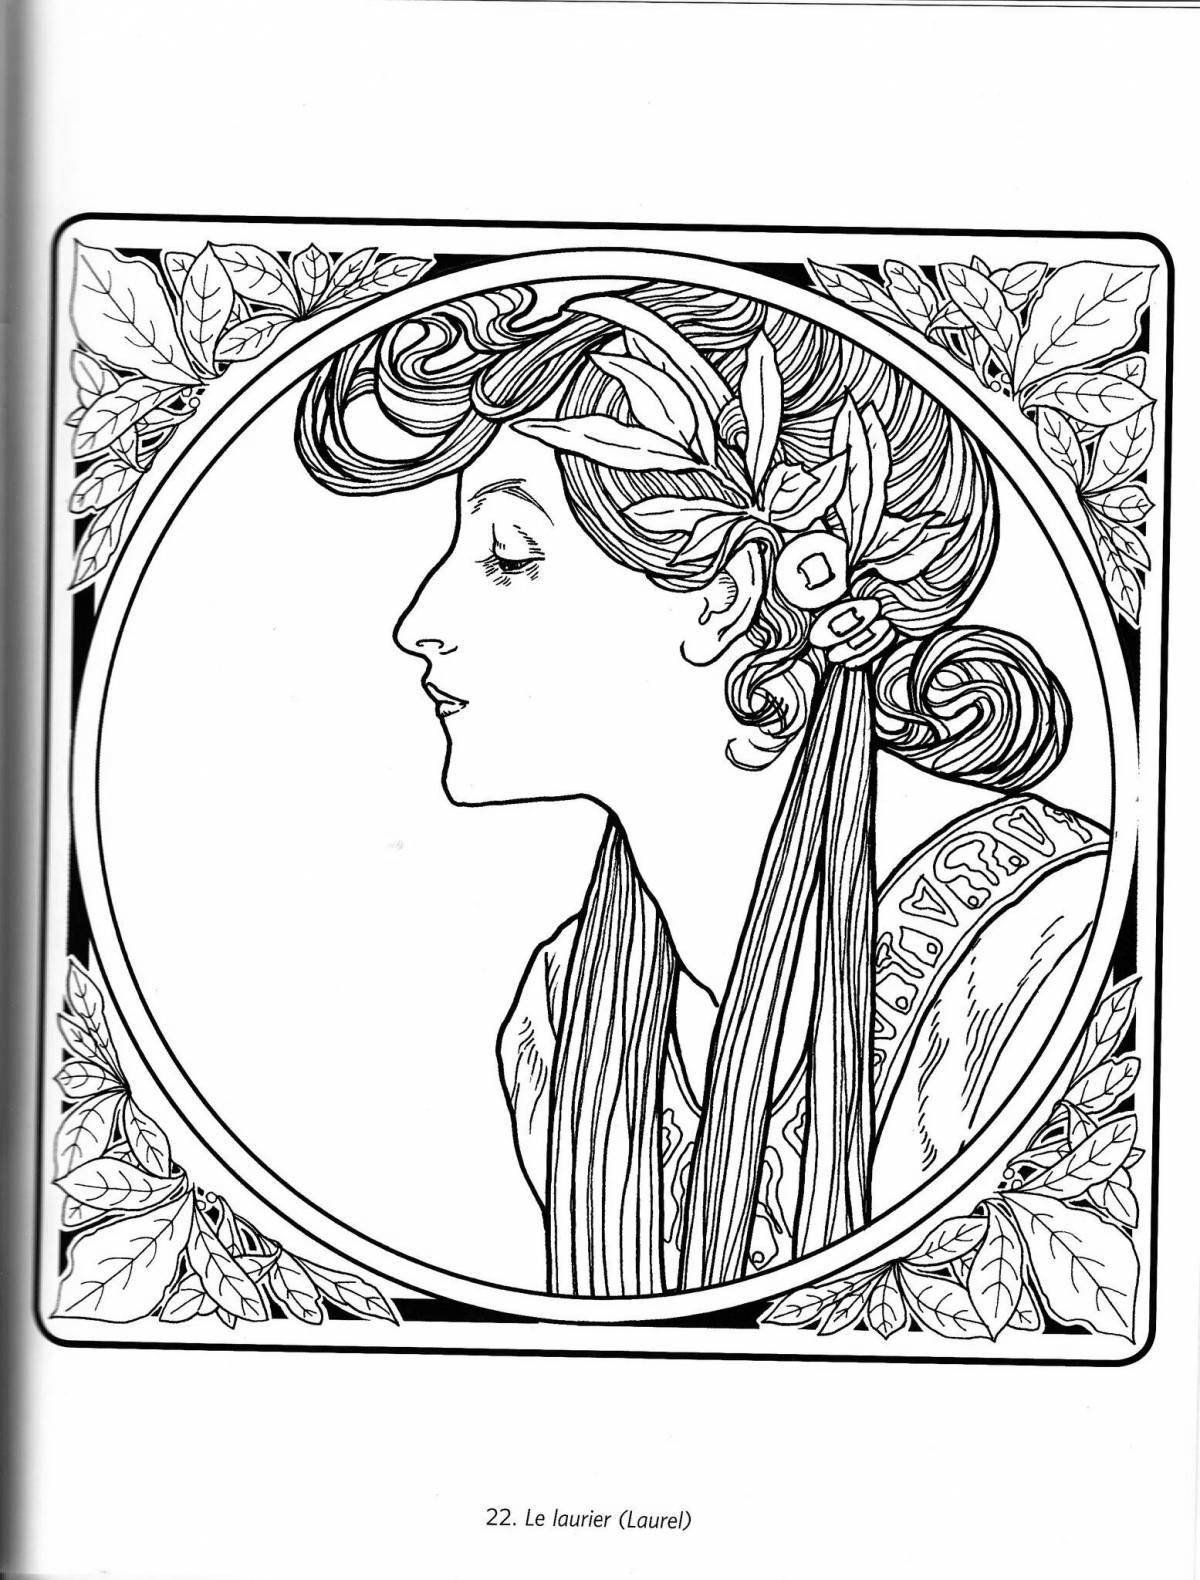 Alphonse Mucha's awesome coloring book